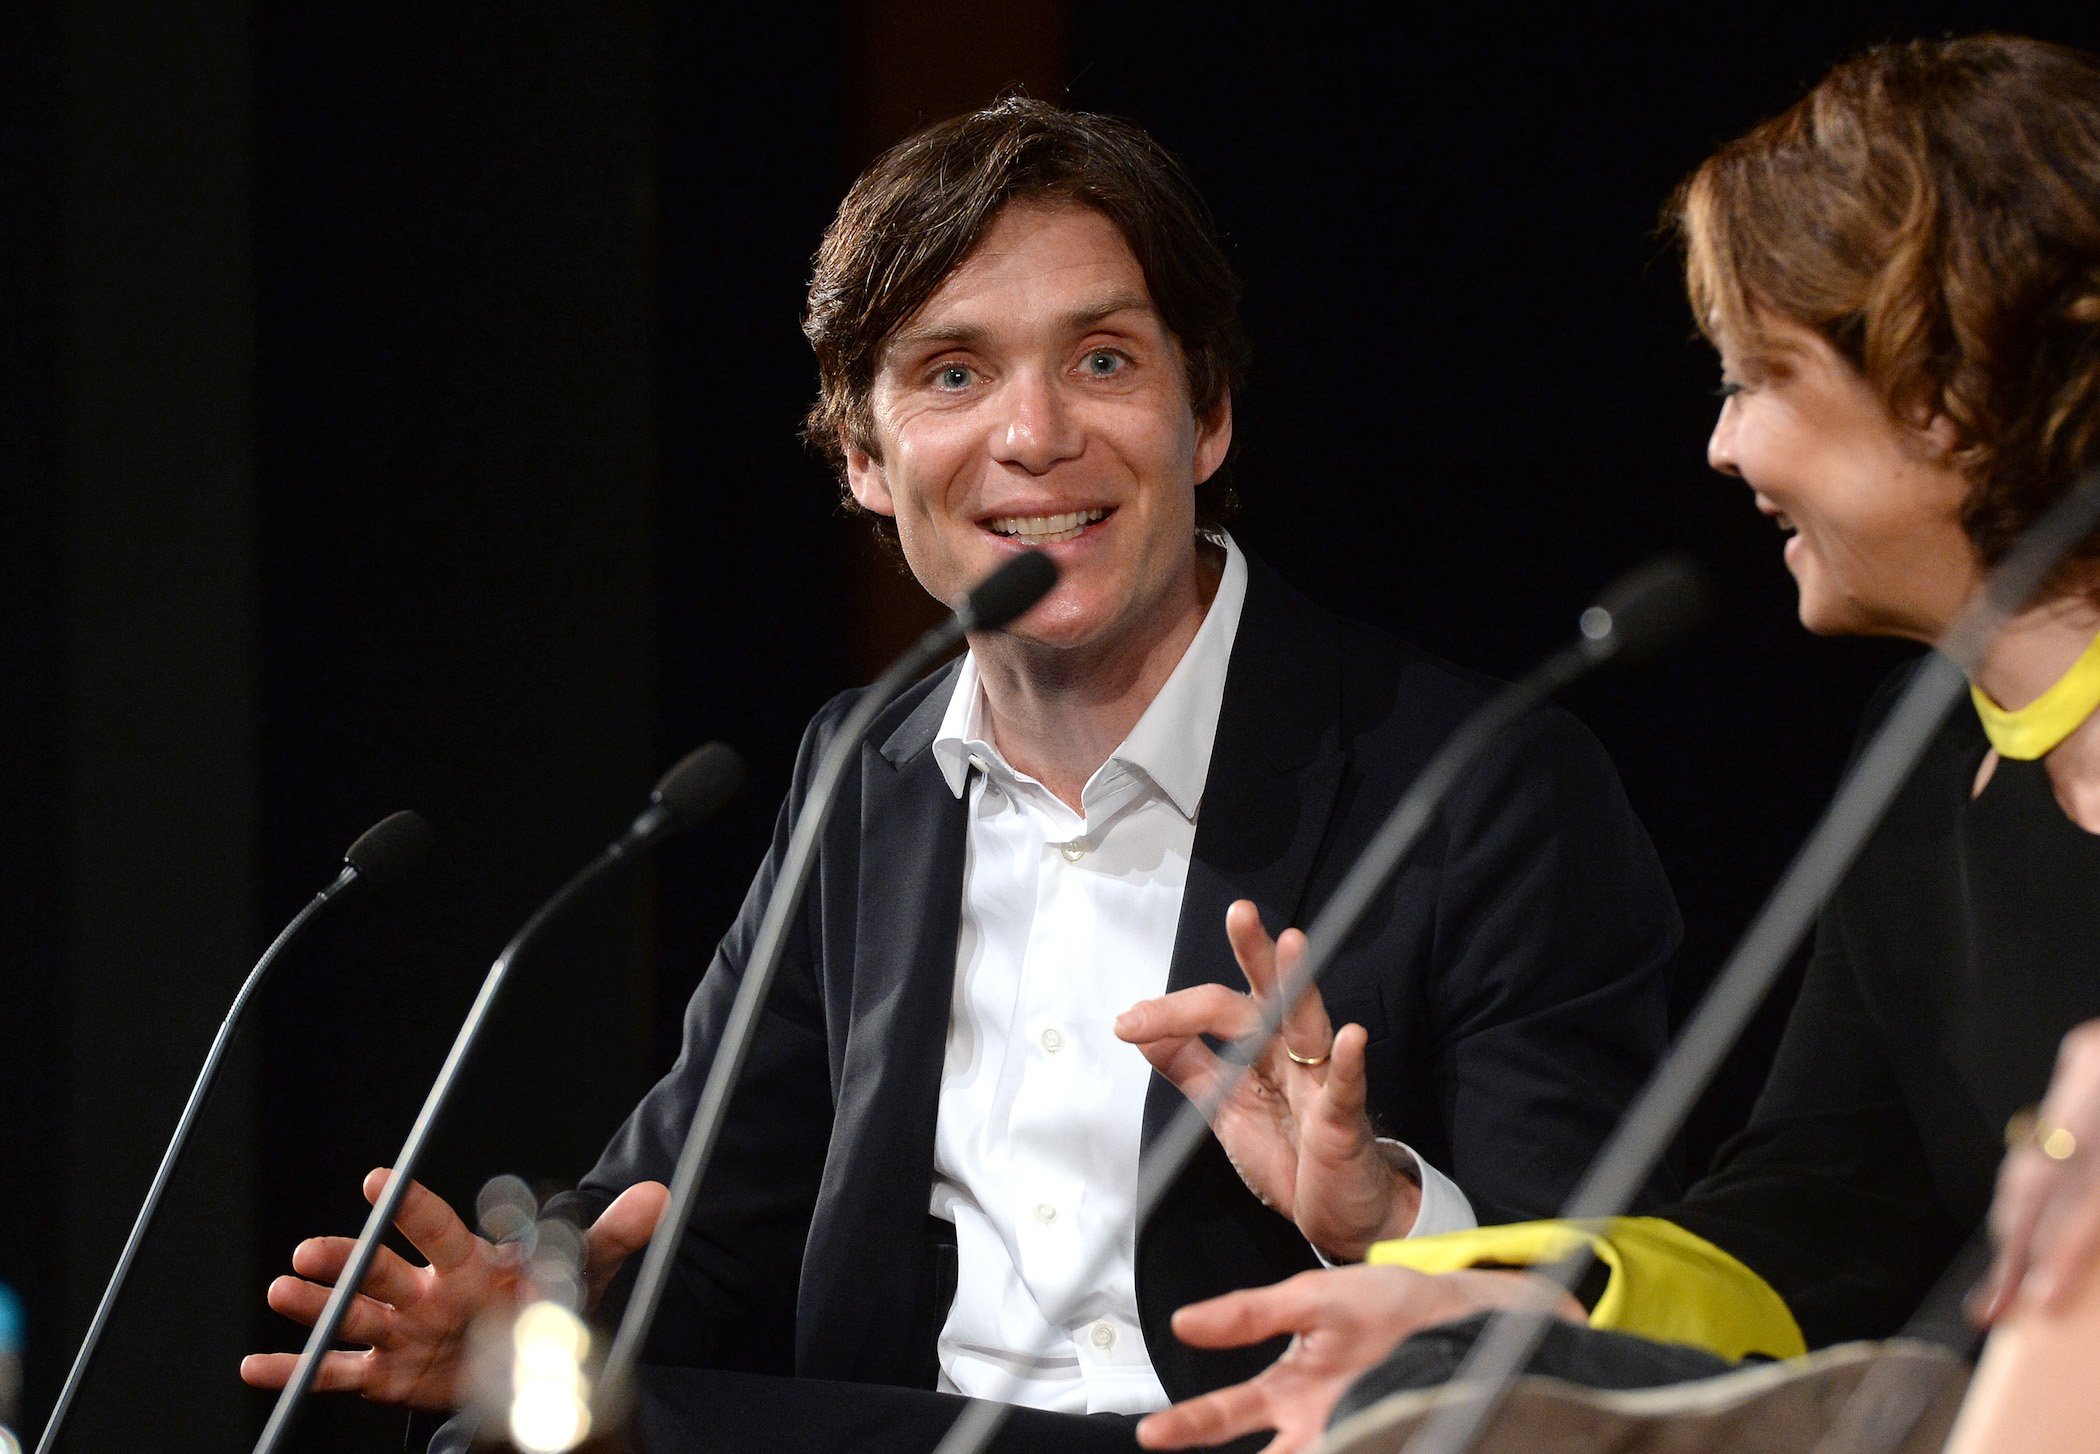 Cillian Murphy, actor who plays Thomas Shelby in 'Peaky Blinders' Season 6, making an excited face while answering questions